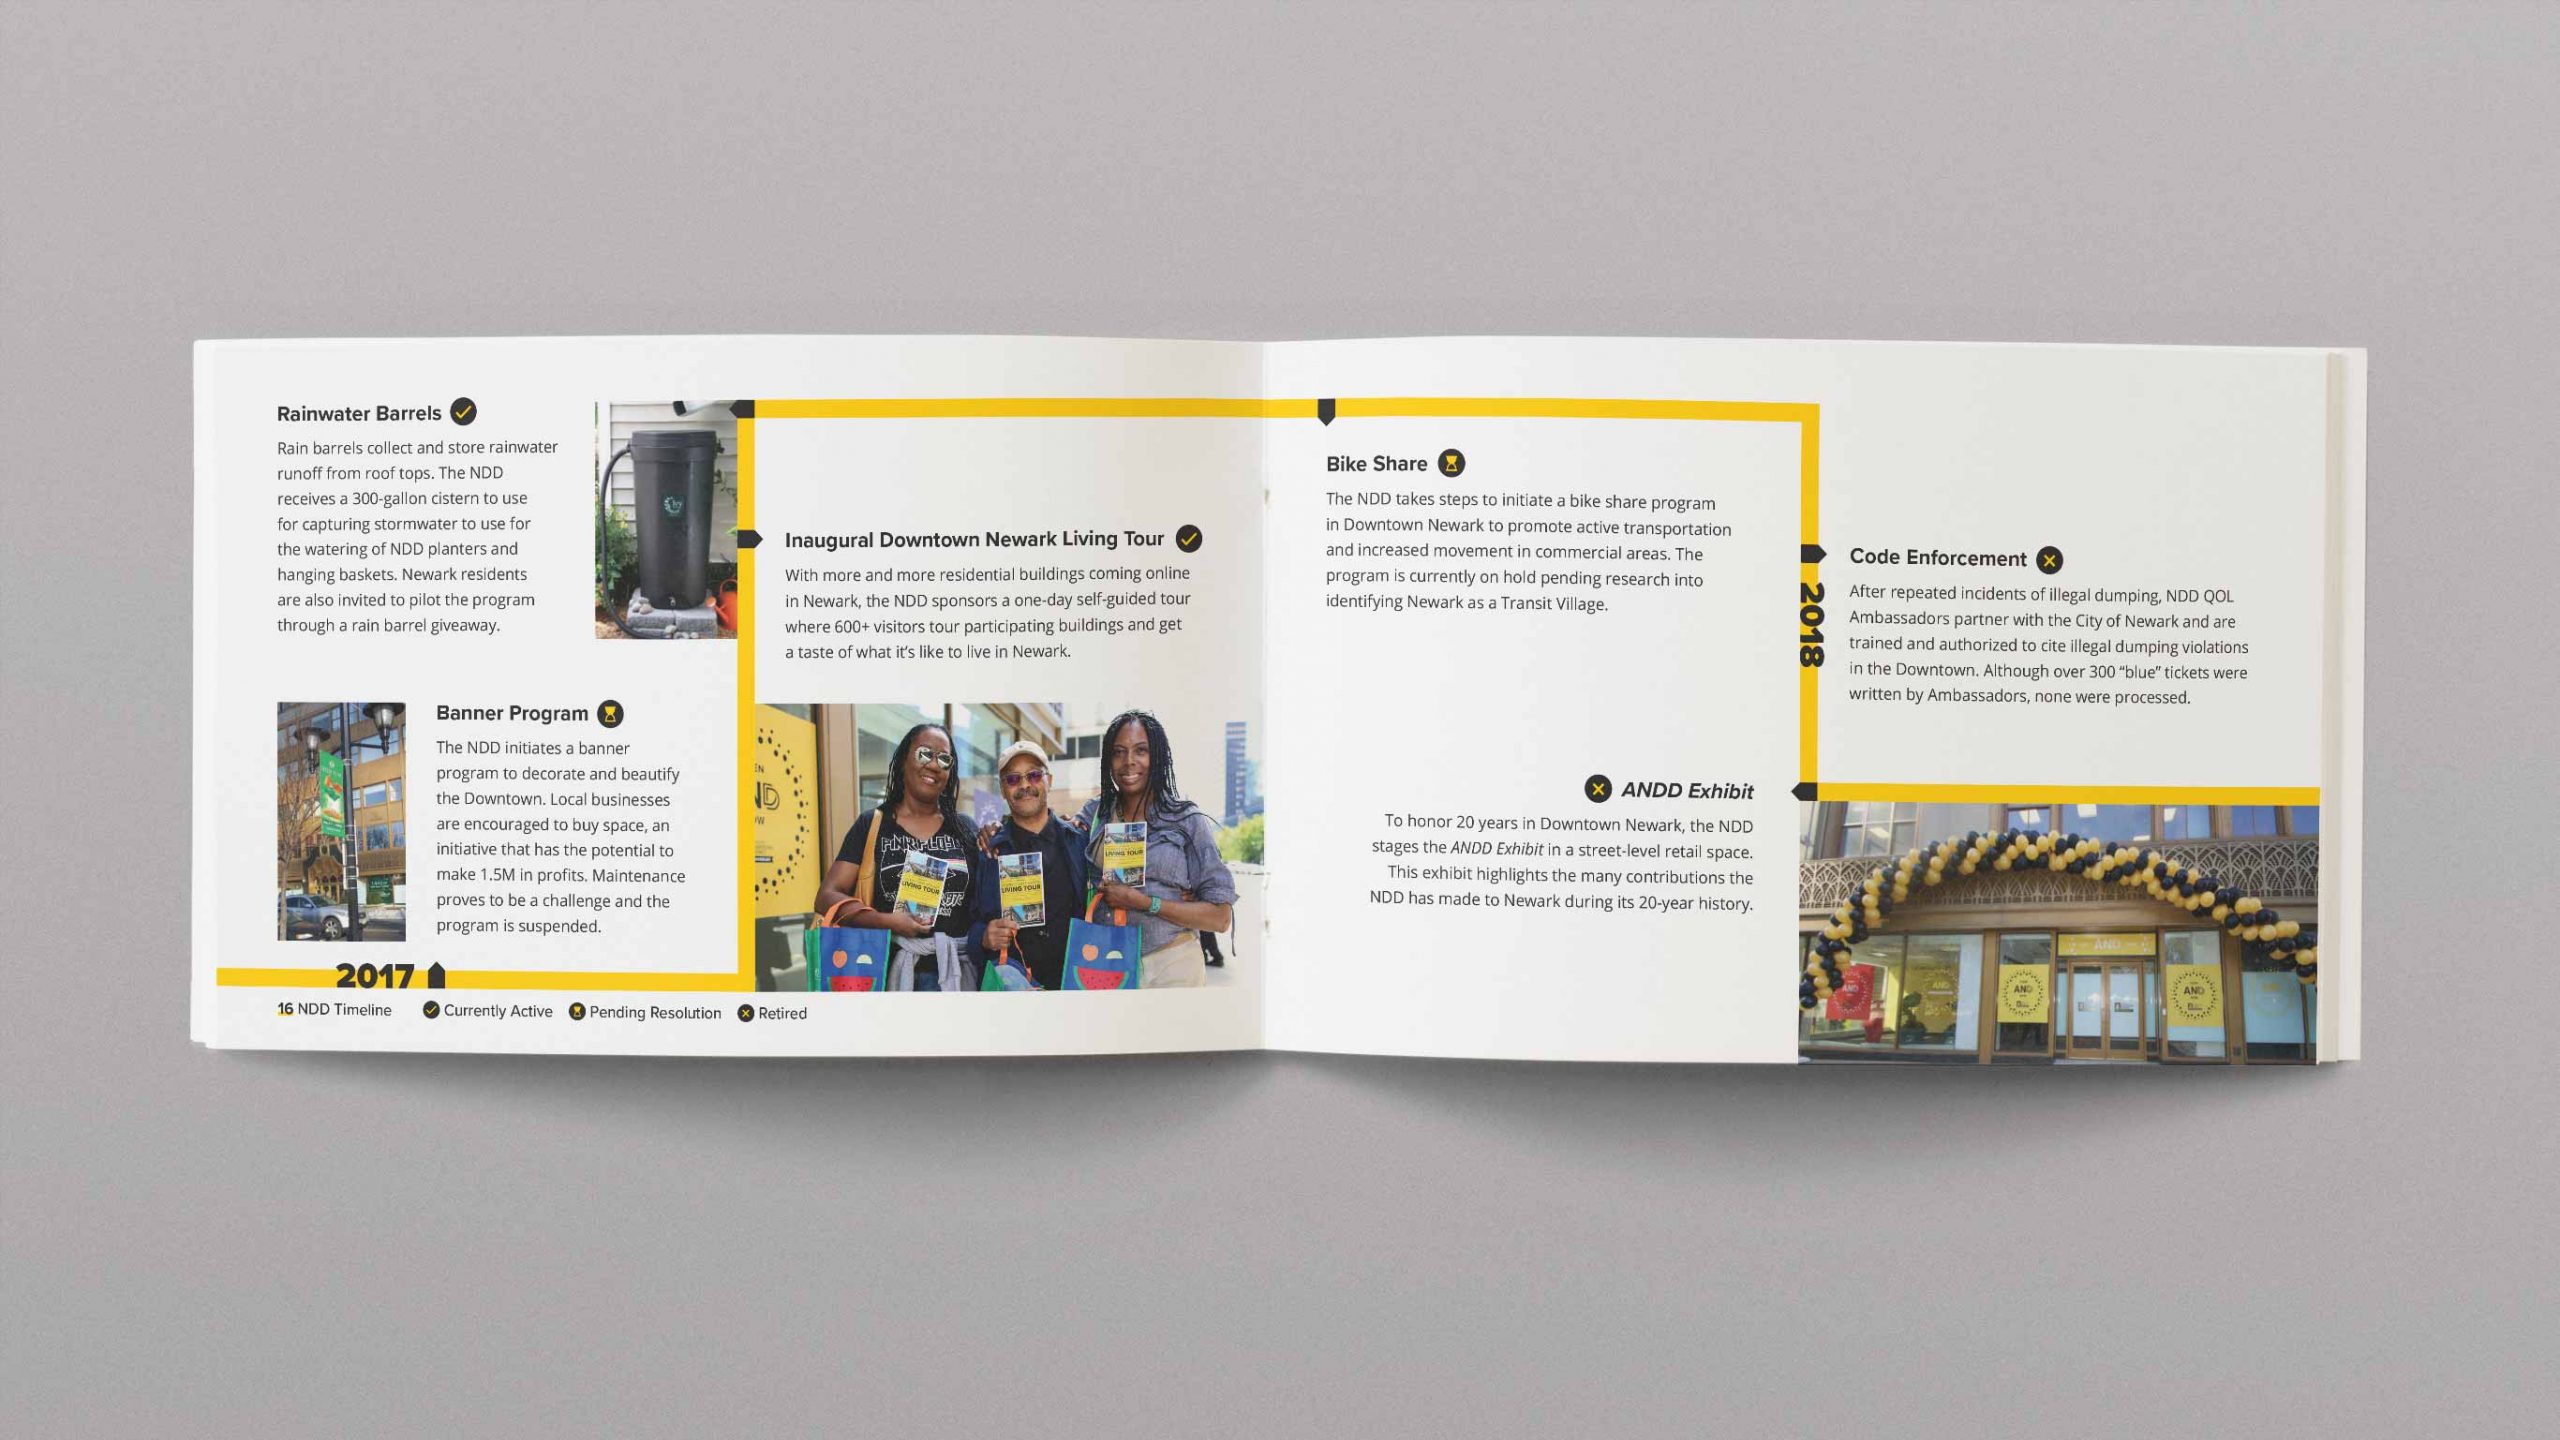 Full spread layout showing timeline and large photography